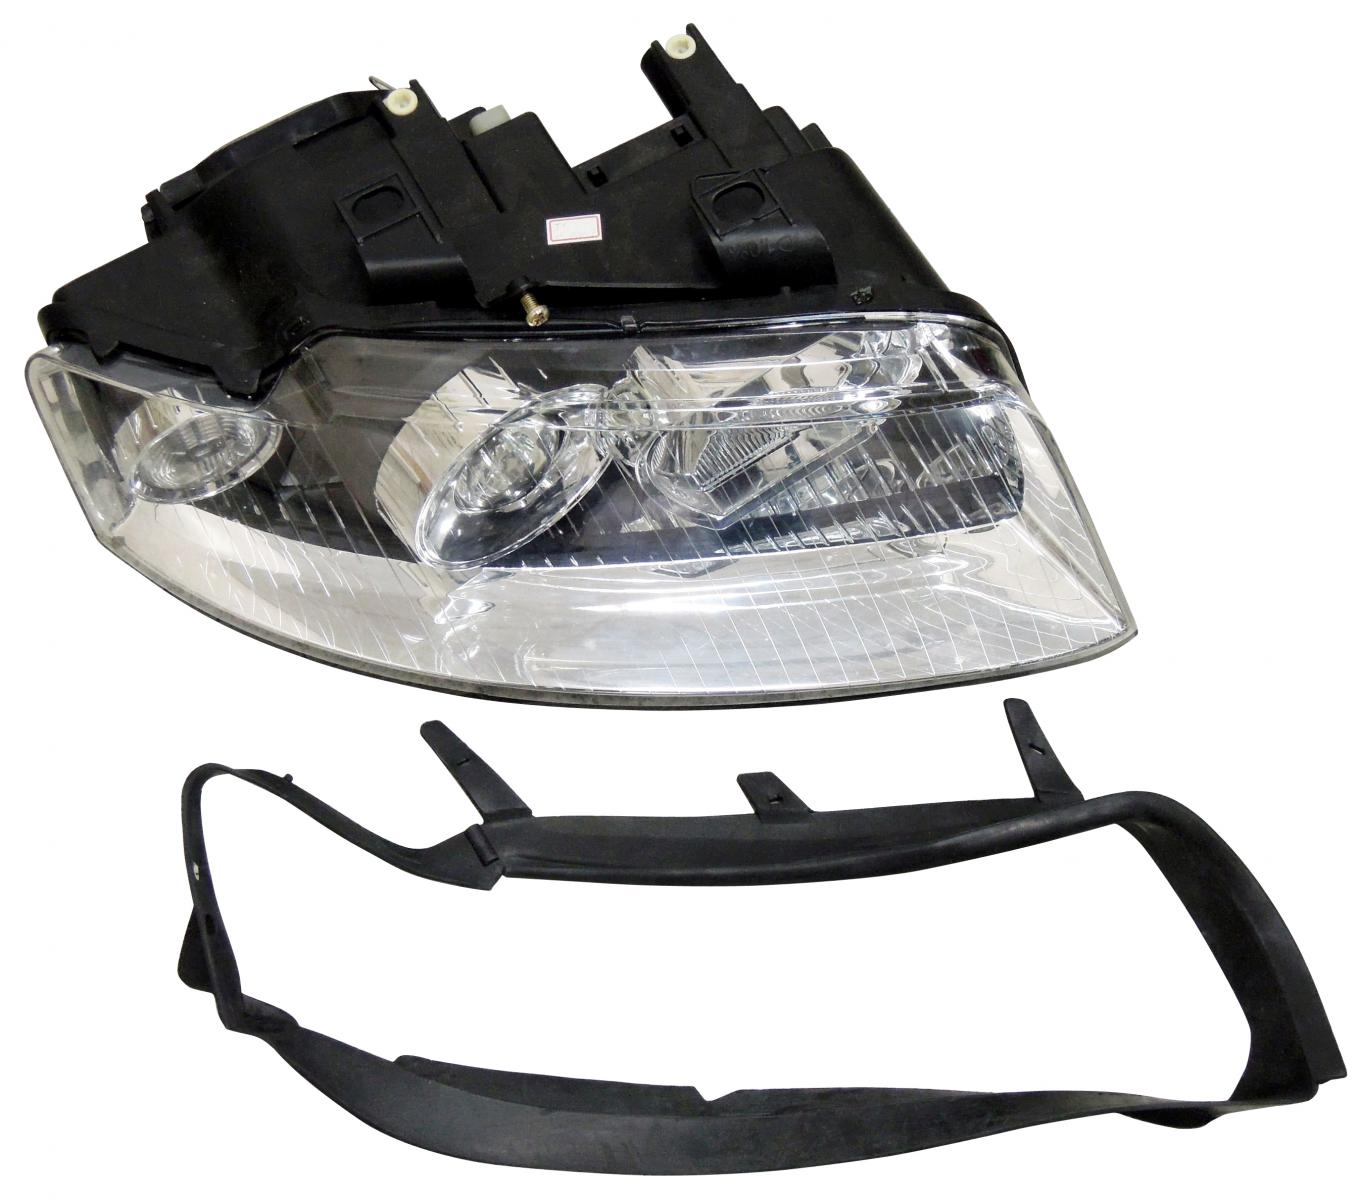 Automotive lamp shade industry dynamics and prospects